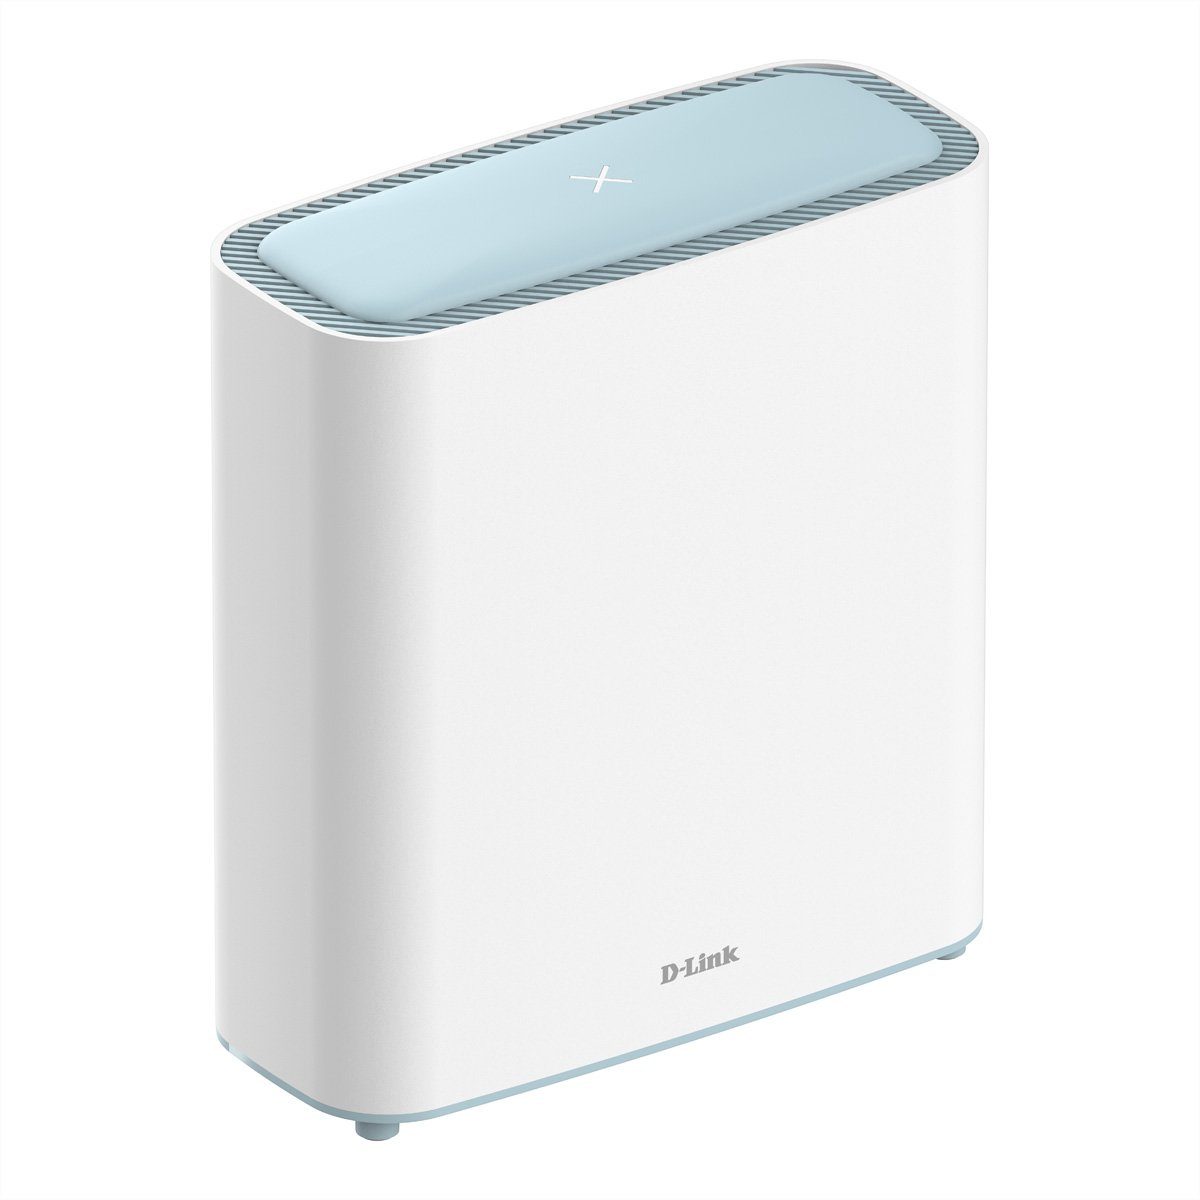 D-Link M32-3 EaglePro AI, 6, MU-MIMO WLAN-Repeater, System, AX3200, 3-Pack Mesh WiFi